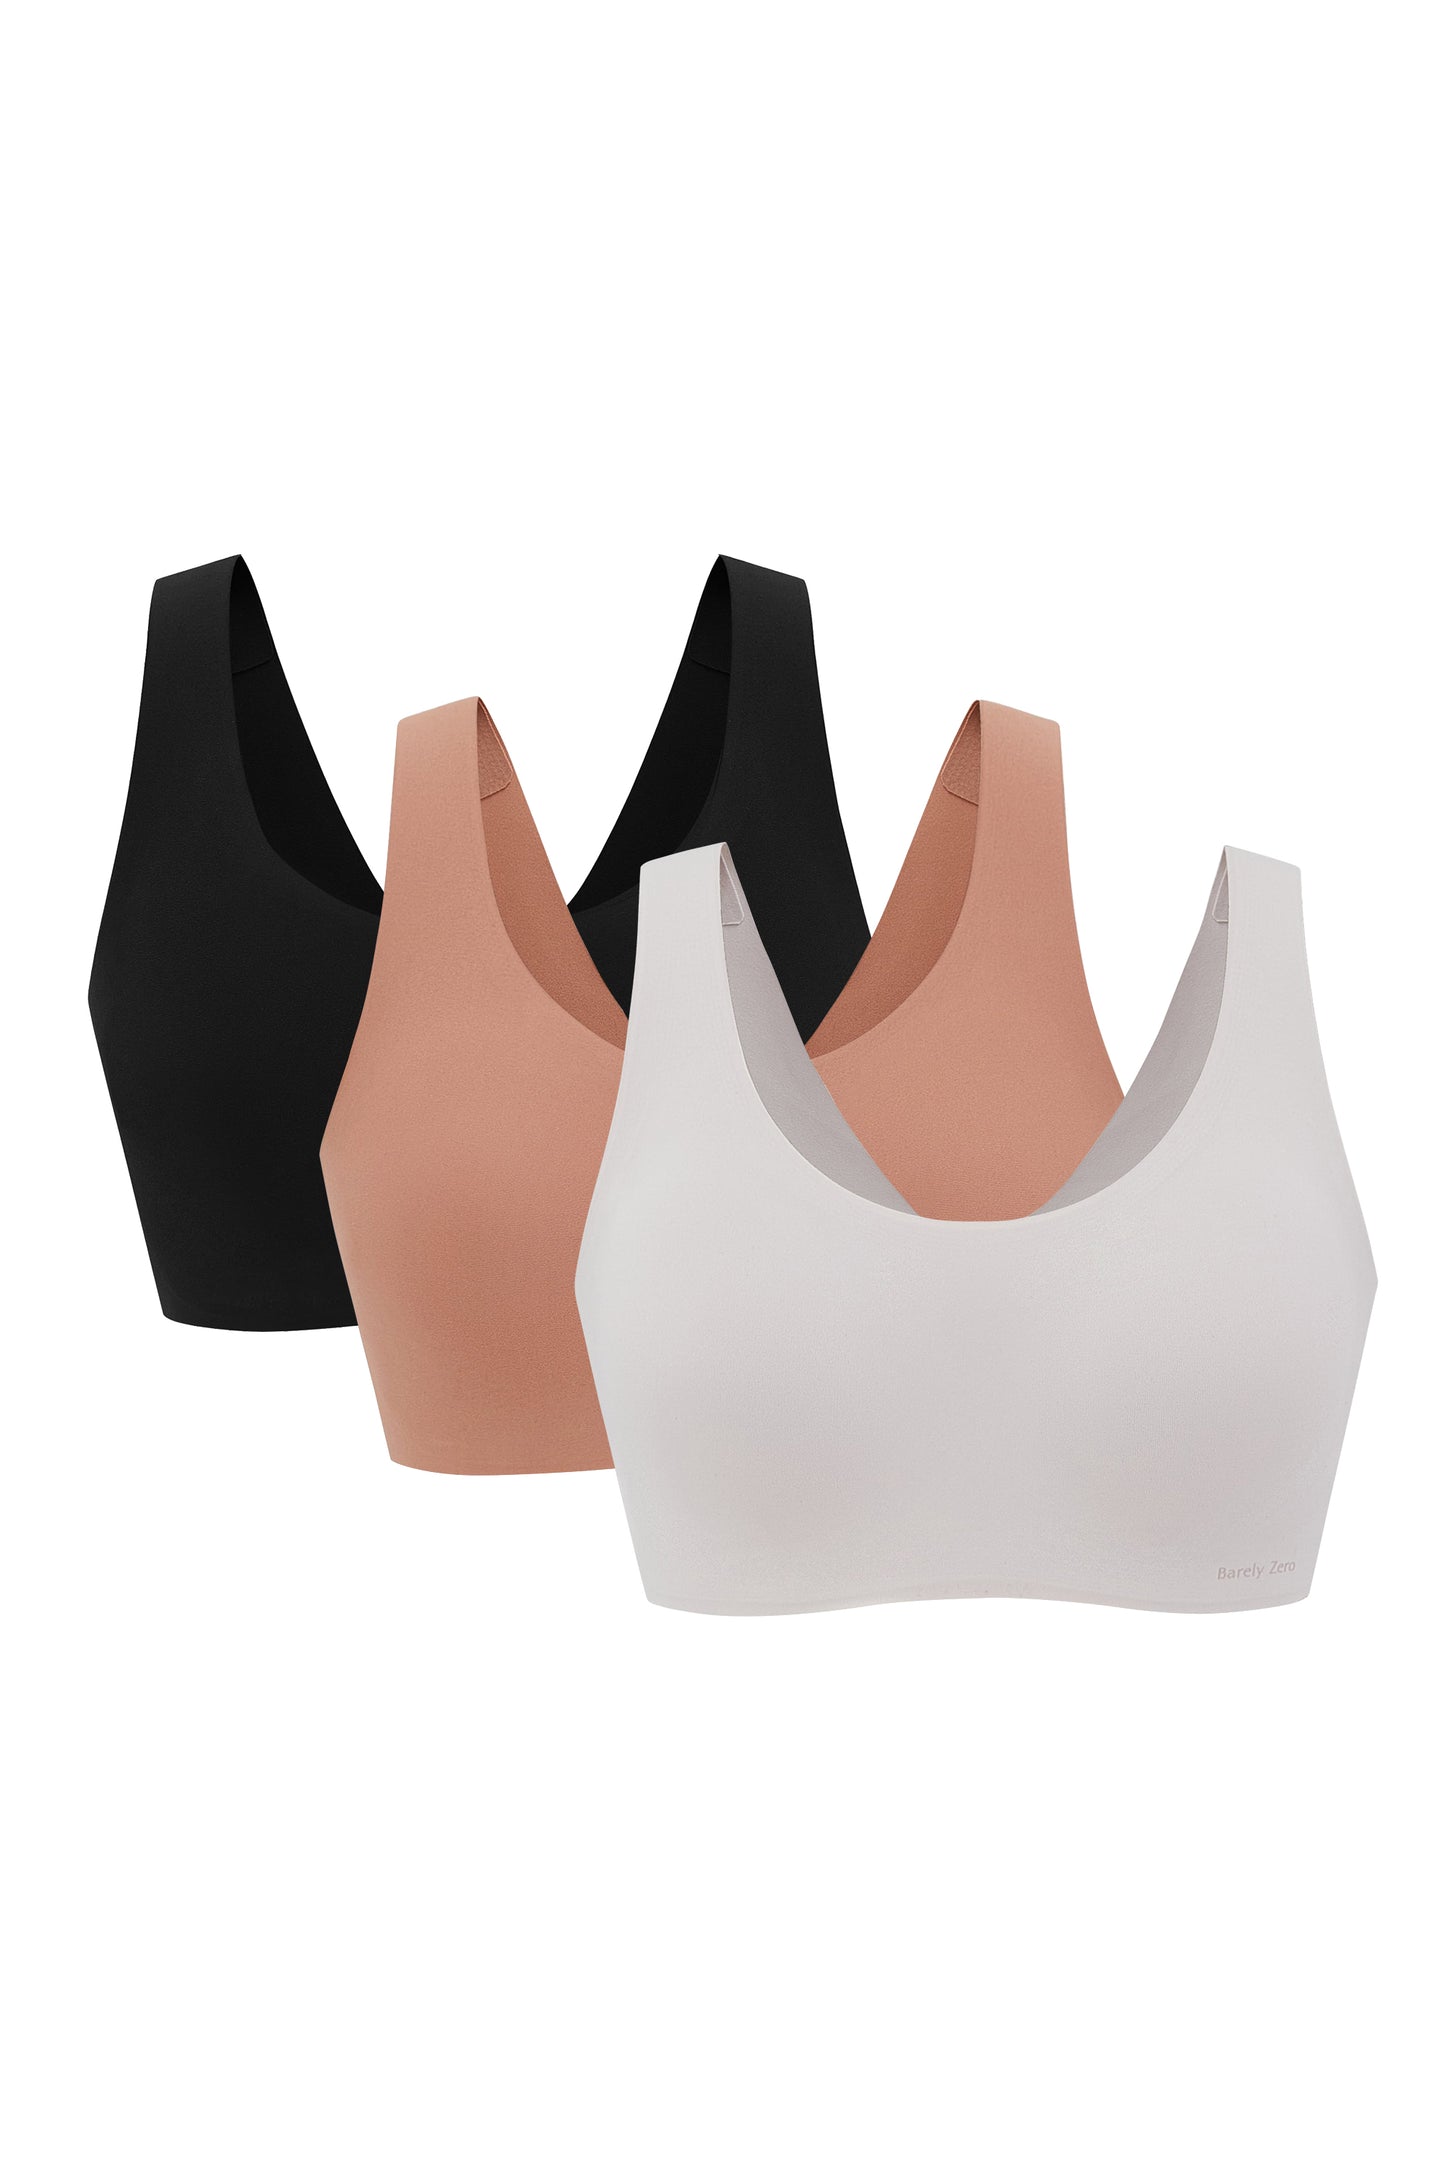 Three Barely Zero Classic Bra Trios in black, beige, and white, displayed against a white background. Each bra features a smooth, seamless design and a racerback cut.